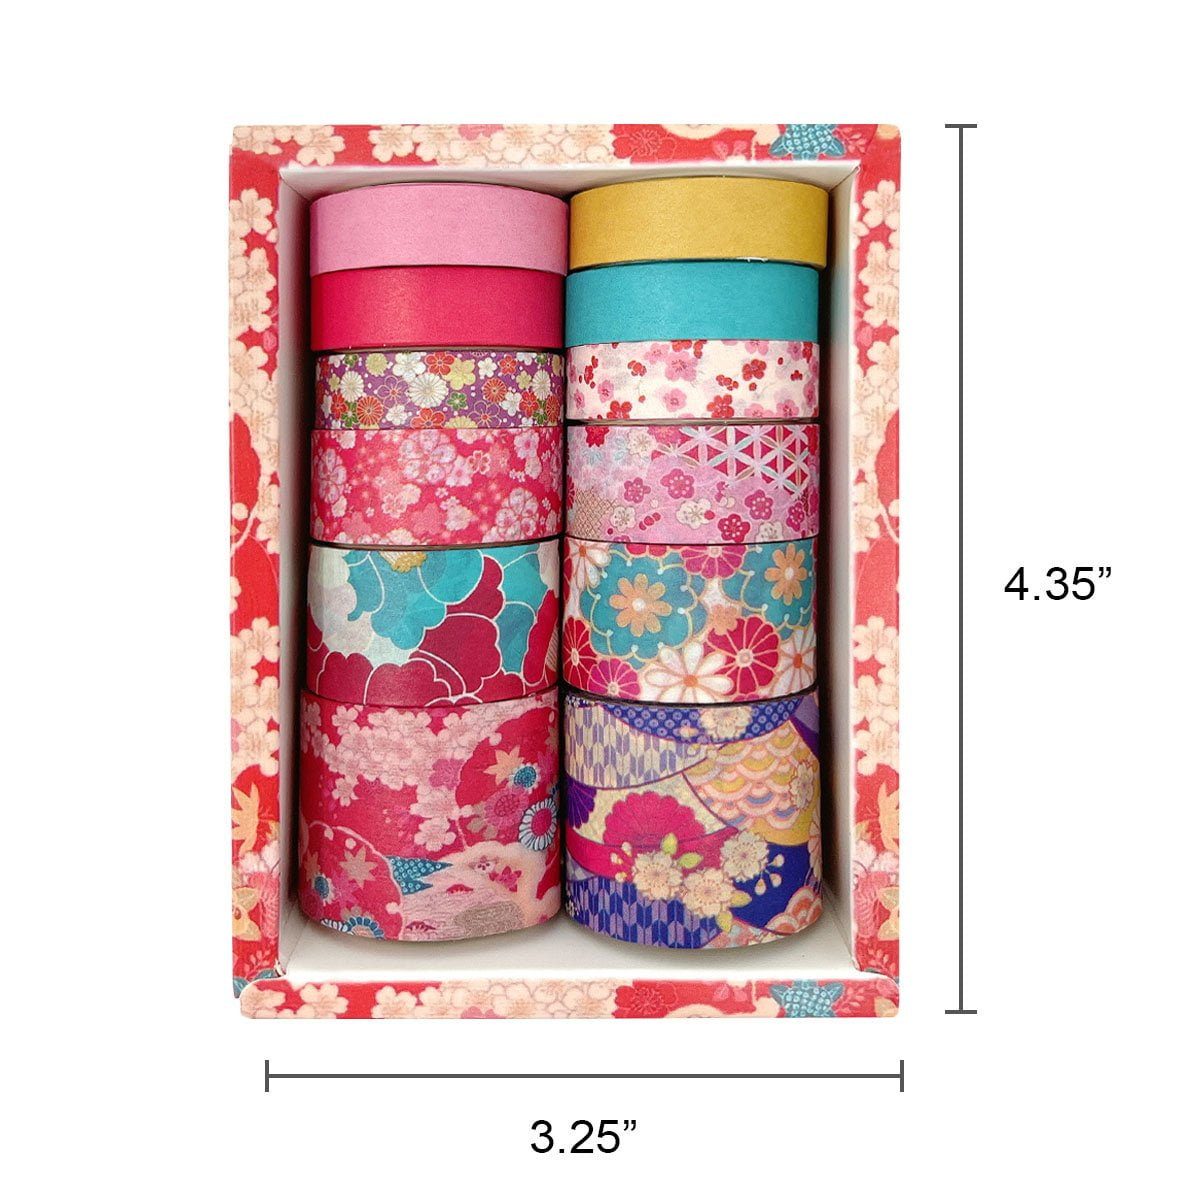 Zuozee 28 Rolls Washi Tape Set, 3 Size Washi Tapes for Decoration, Floral  Washi Tape for Scrapbooking, Decorative Tape for DIY Crafts, Gift Wrapping